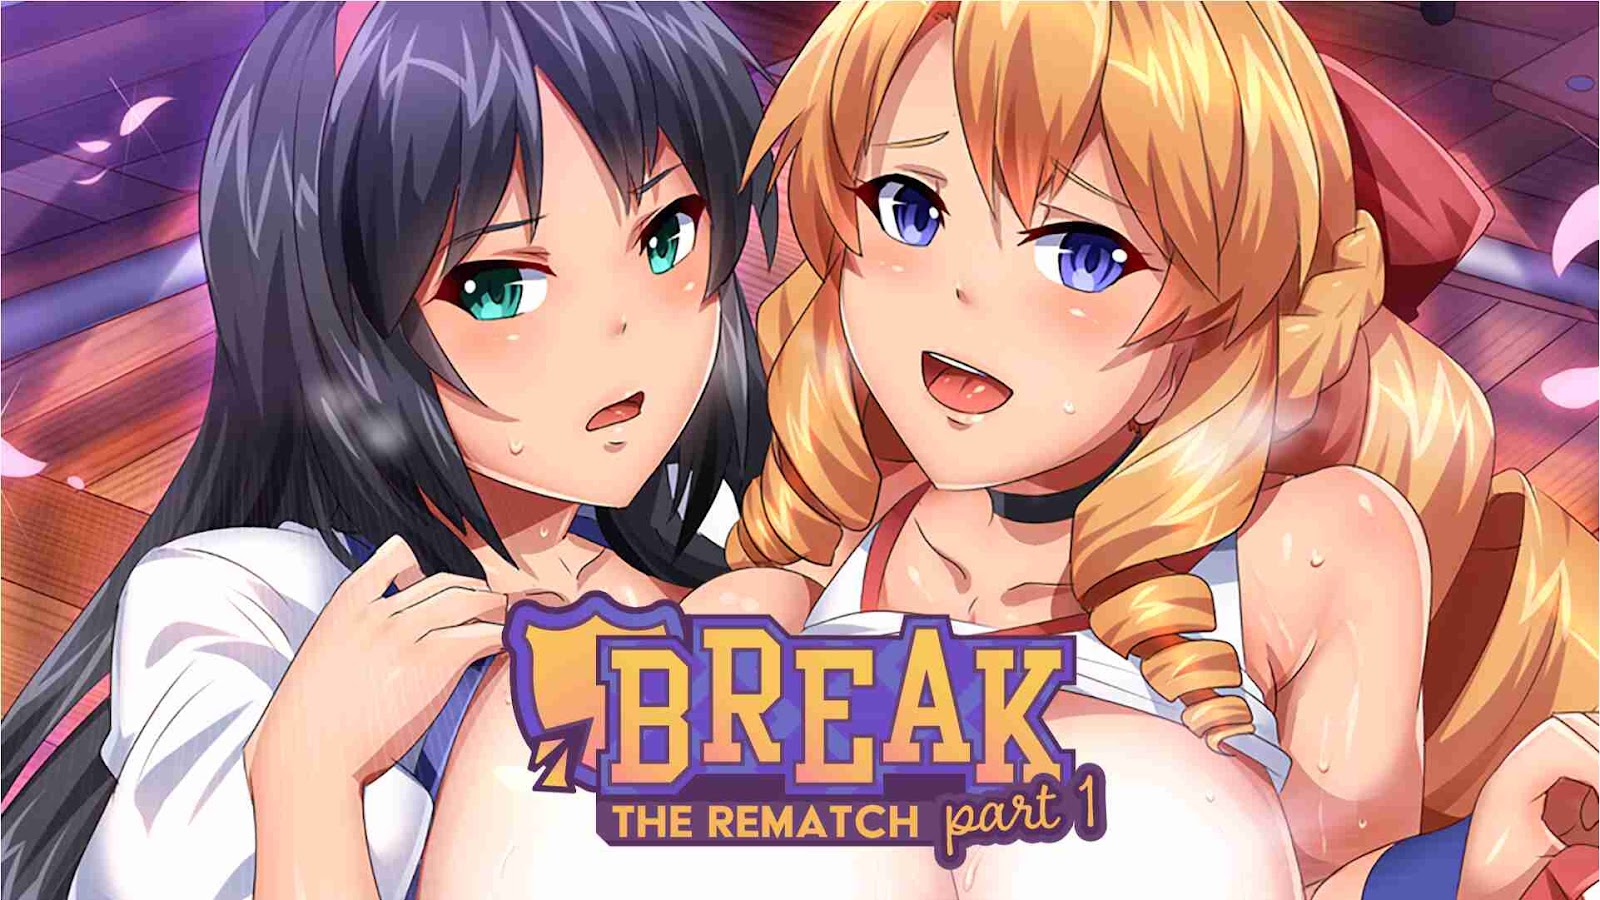 Break The Rematch [Deluxe Edition]